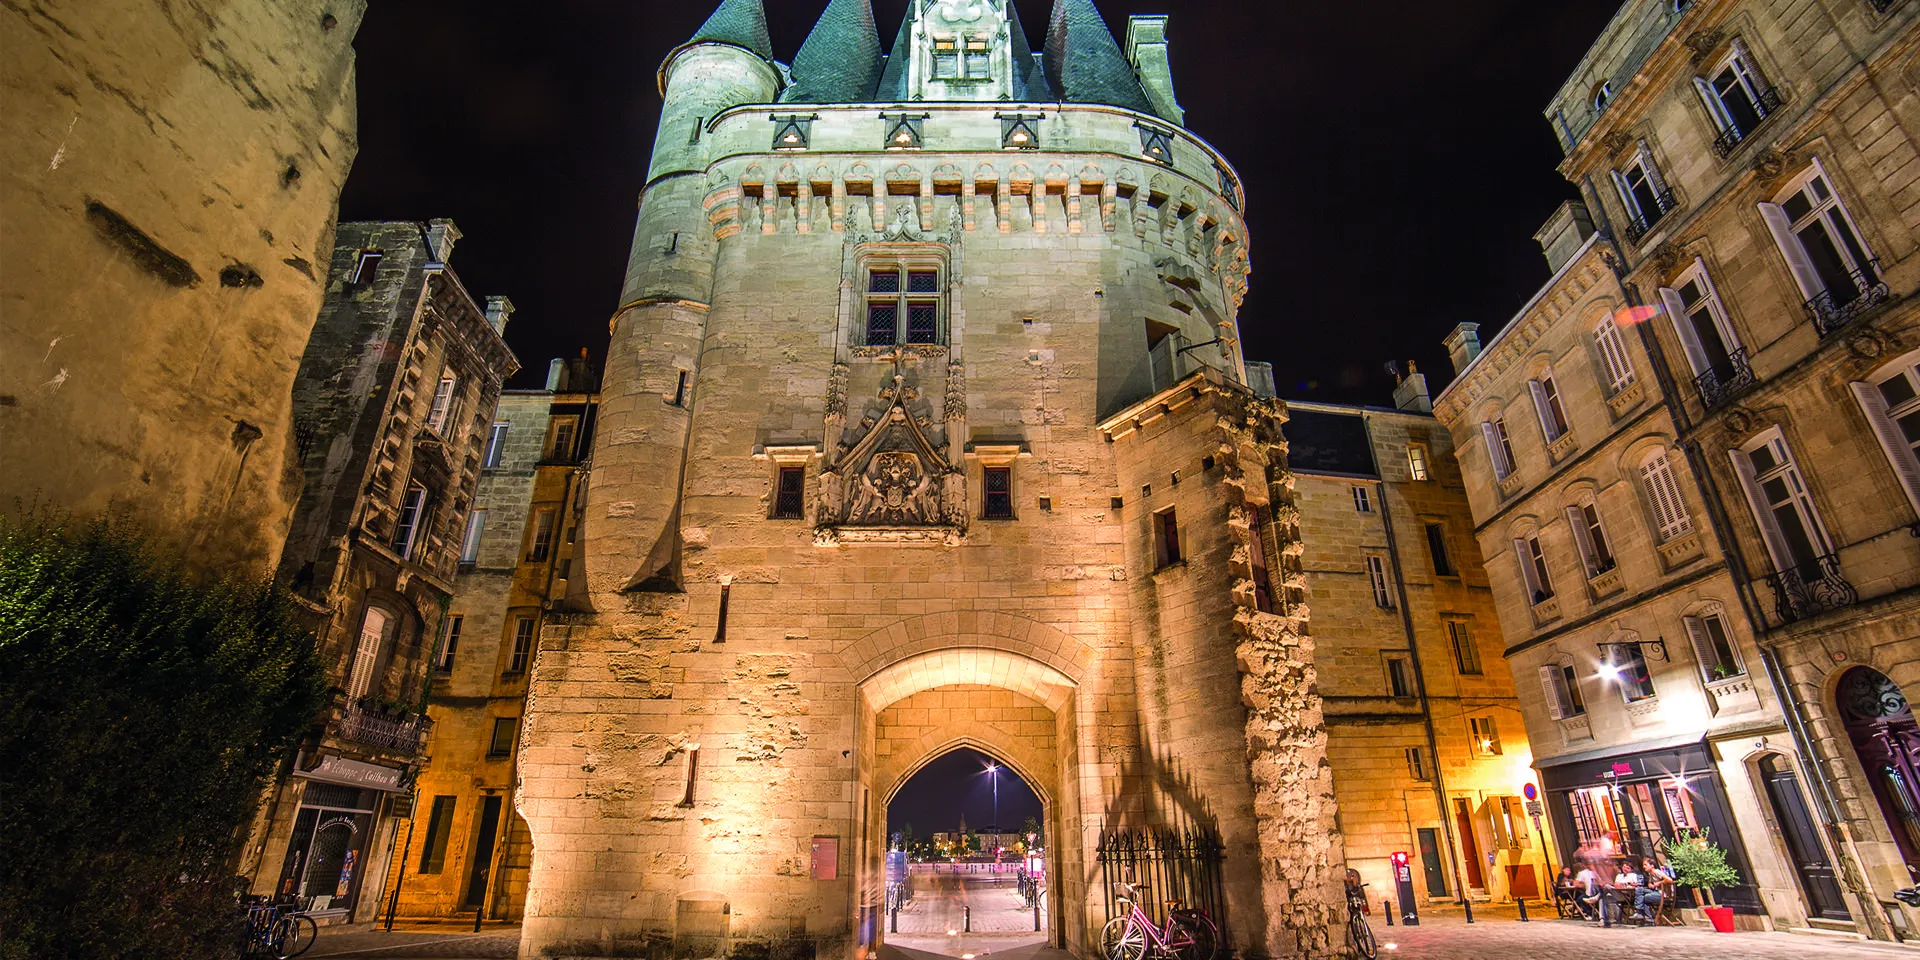 Palace Gate in France, Europe | Architecture - Rated 3.7